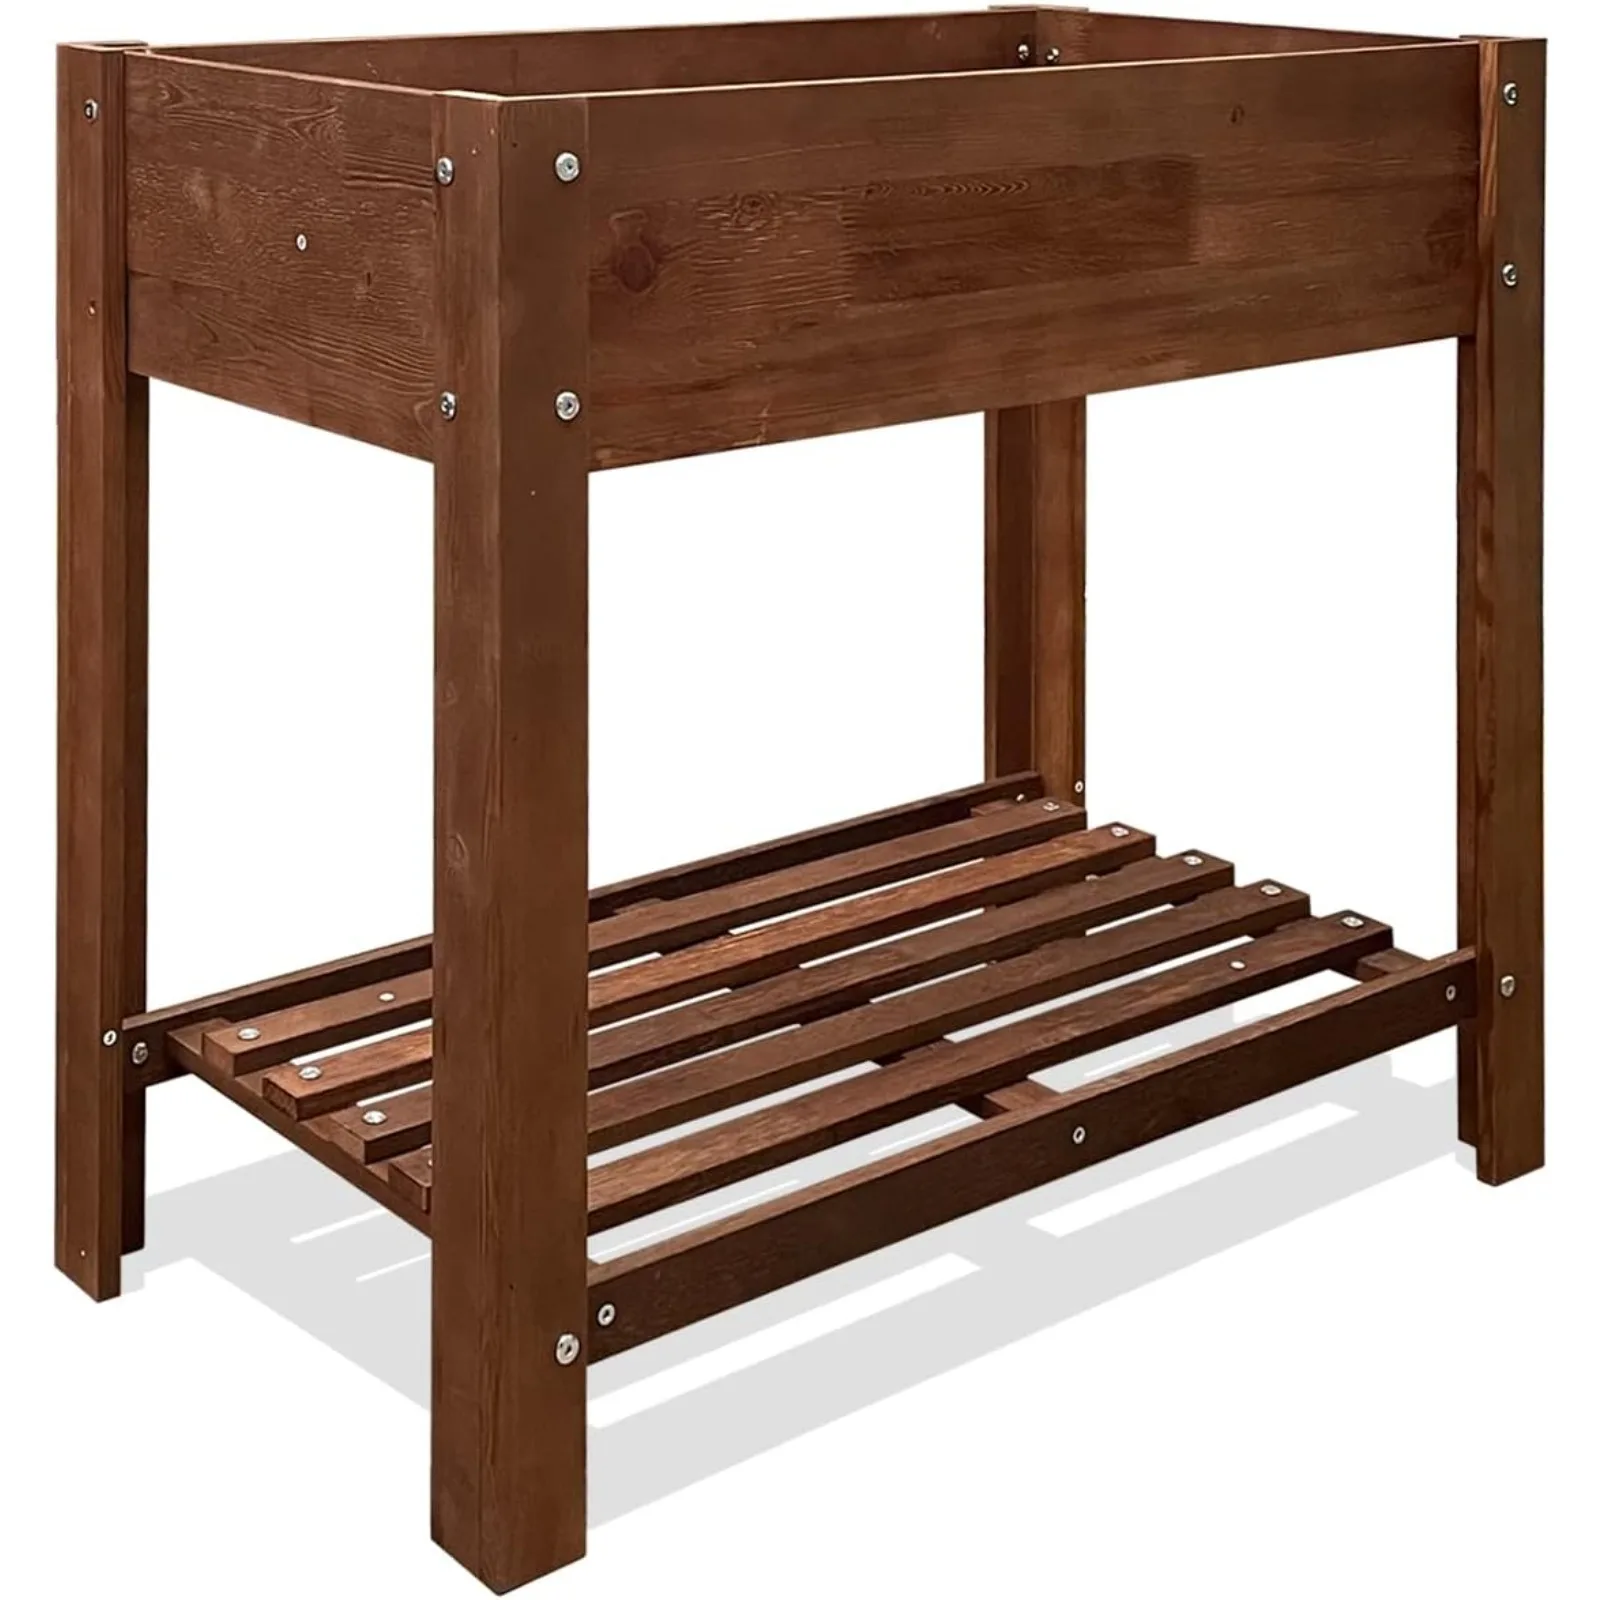 

86 York Raised Garden Bed Kit with Legs | Outdoor Elevated Wood Raised Planter Box with